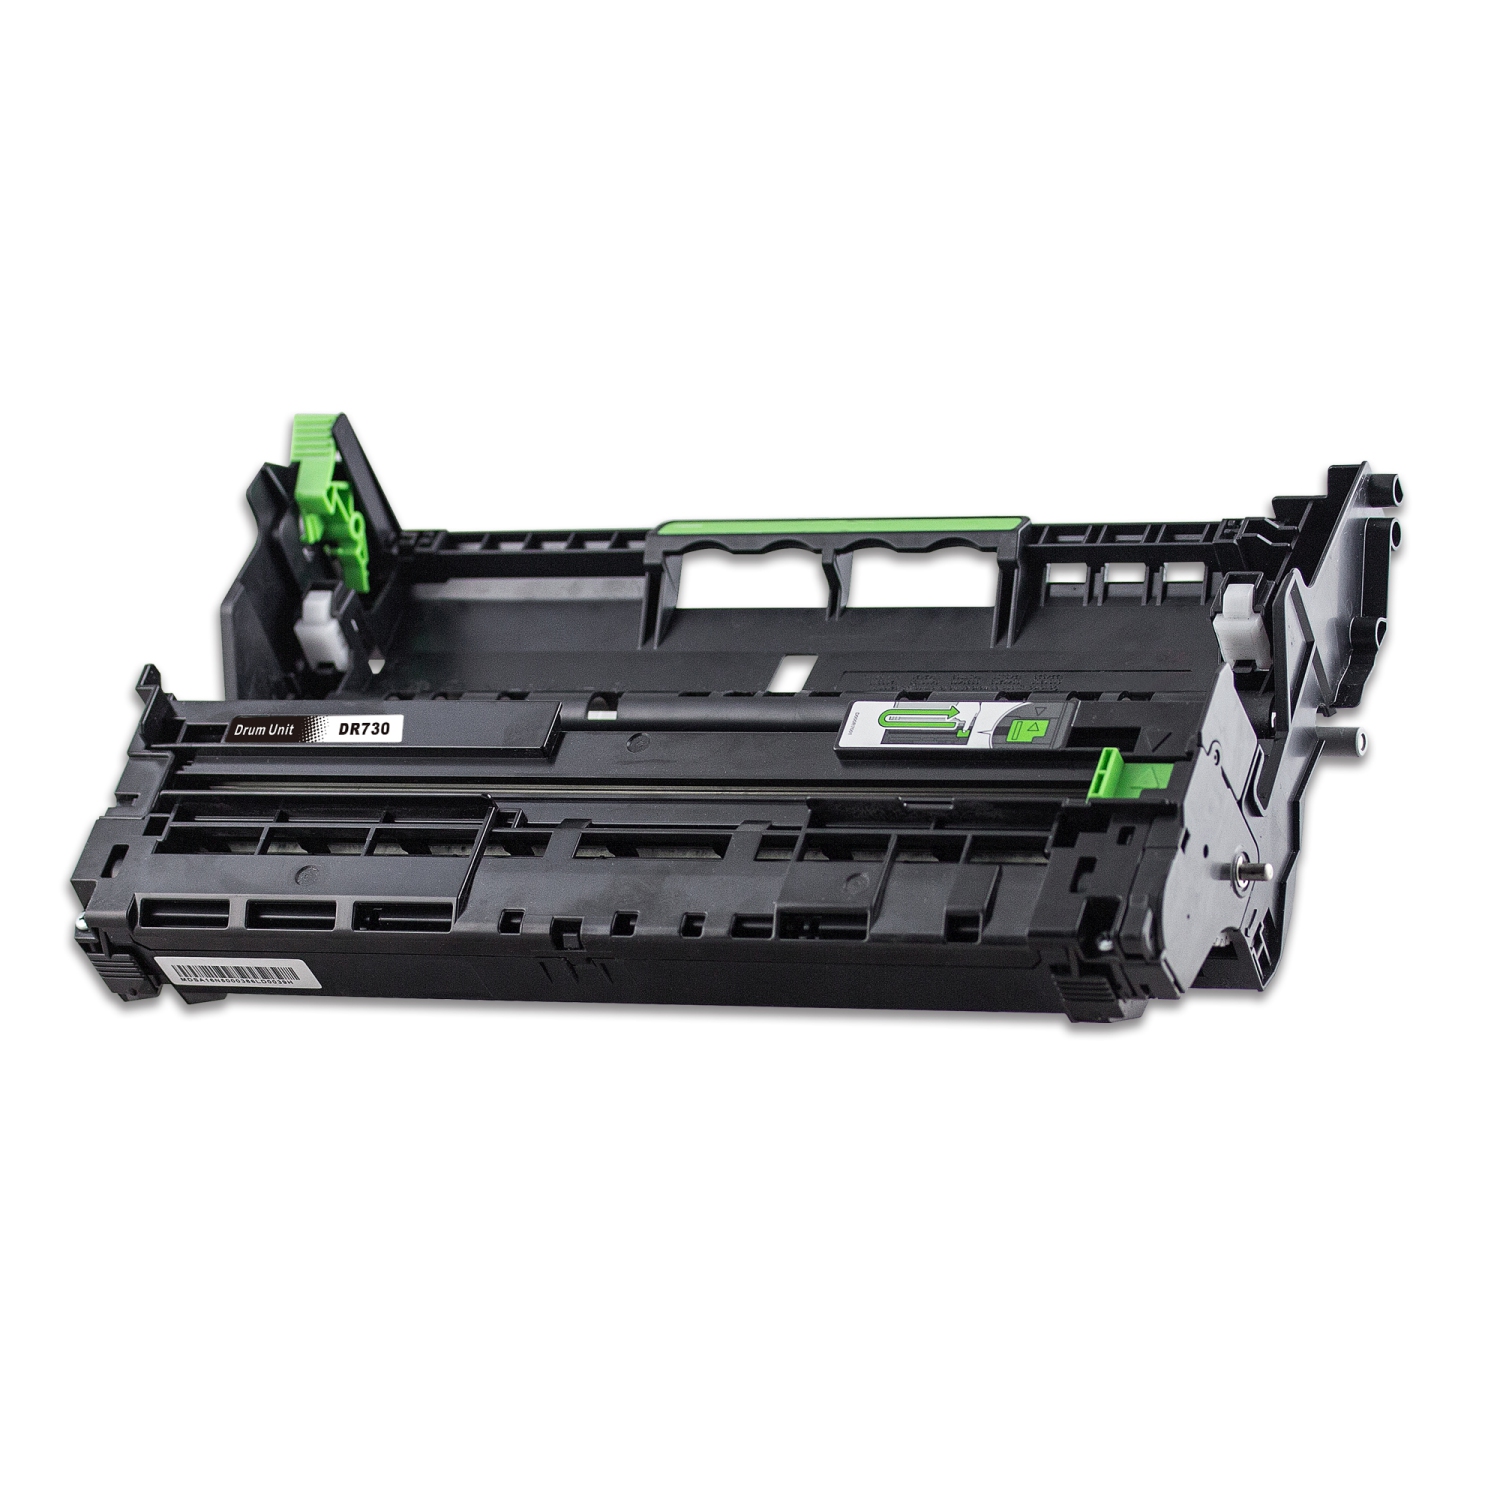 toner4U - fit For Brother DR730 DRUM Unit for DCP-L2550,HL-L2350, HL-L2370,HL-L2370,HL-L2390,HL-L2395,MFC-L2710,MFC-L2730, MFC-L2750,MFC-L2750,TN730,TN760